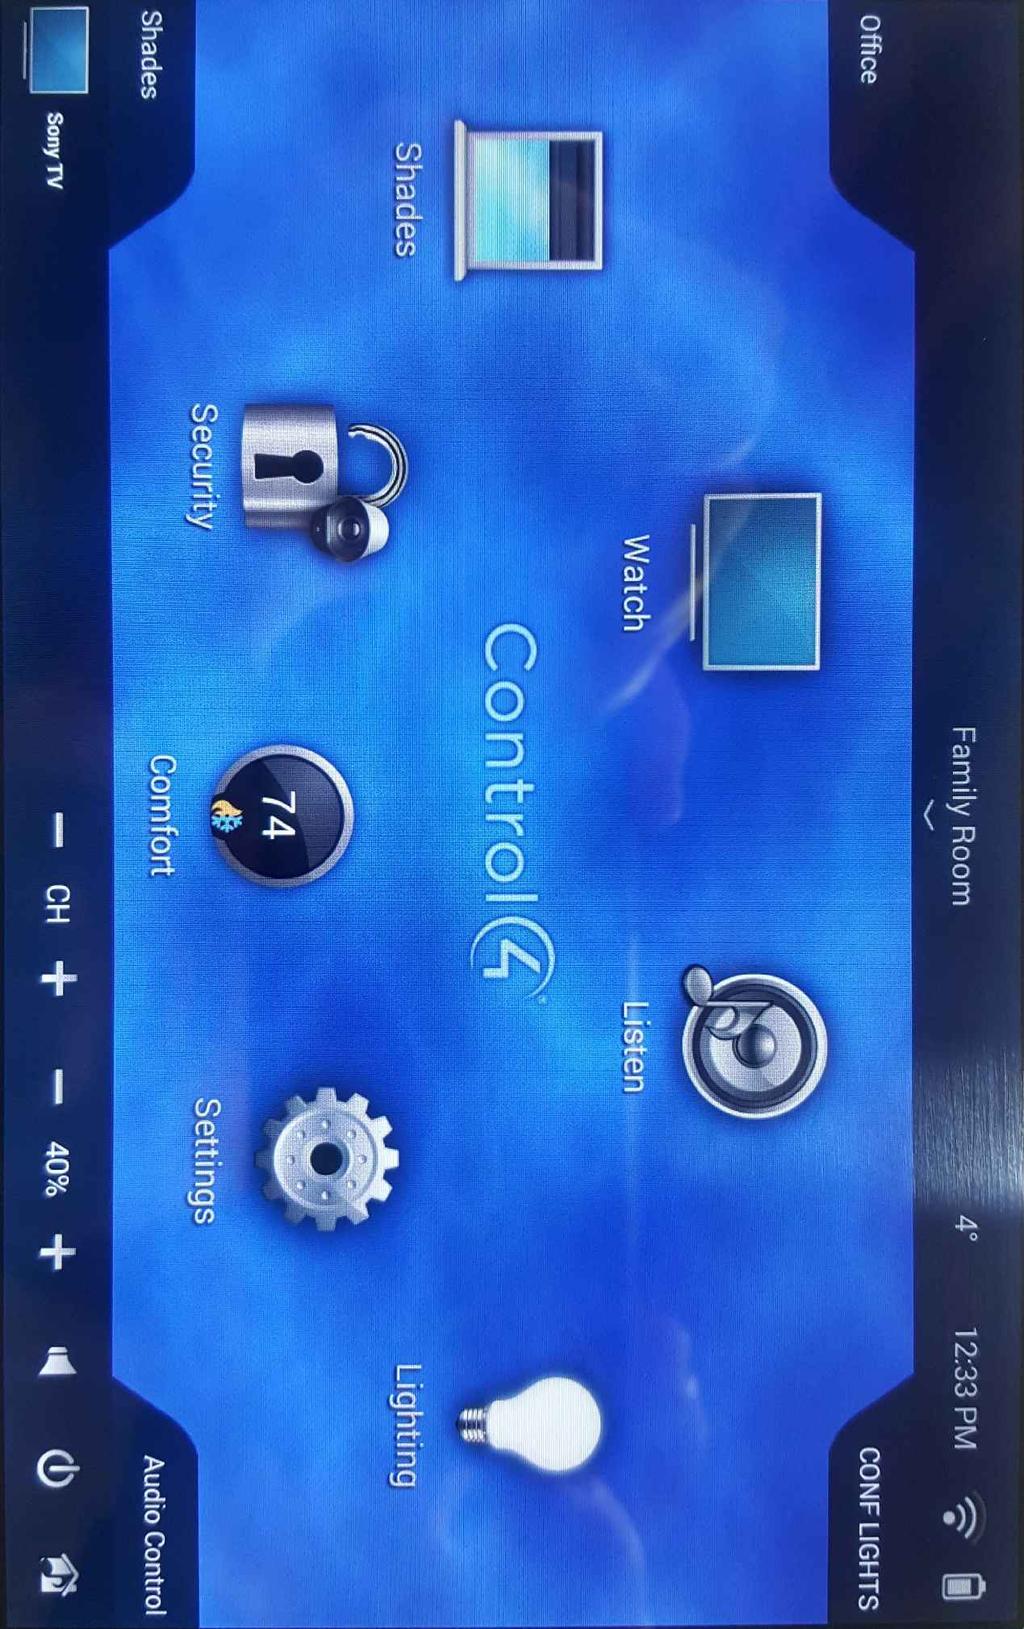 Controls what you are watching in the room Room Short Cuts What Room you are in control of Controls what you are listening to in the room Outside Temperature Current Time Battery level Wifi Signal